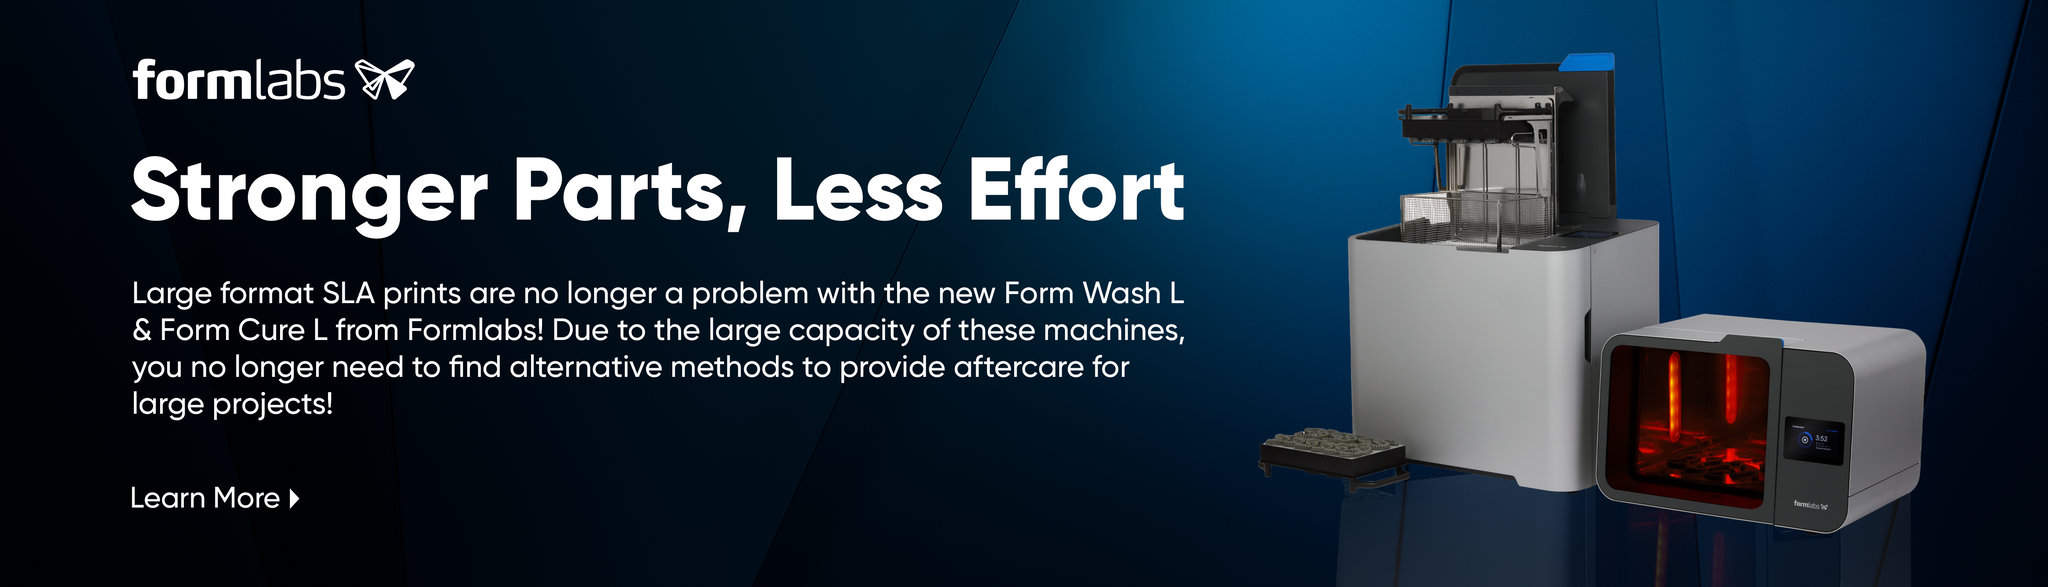 New Form Wash and Form Cure from FormLabs